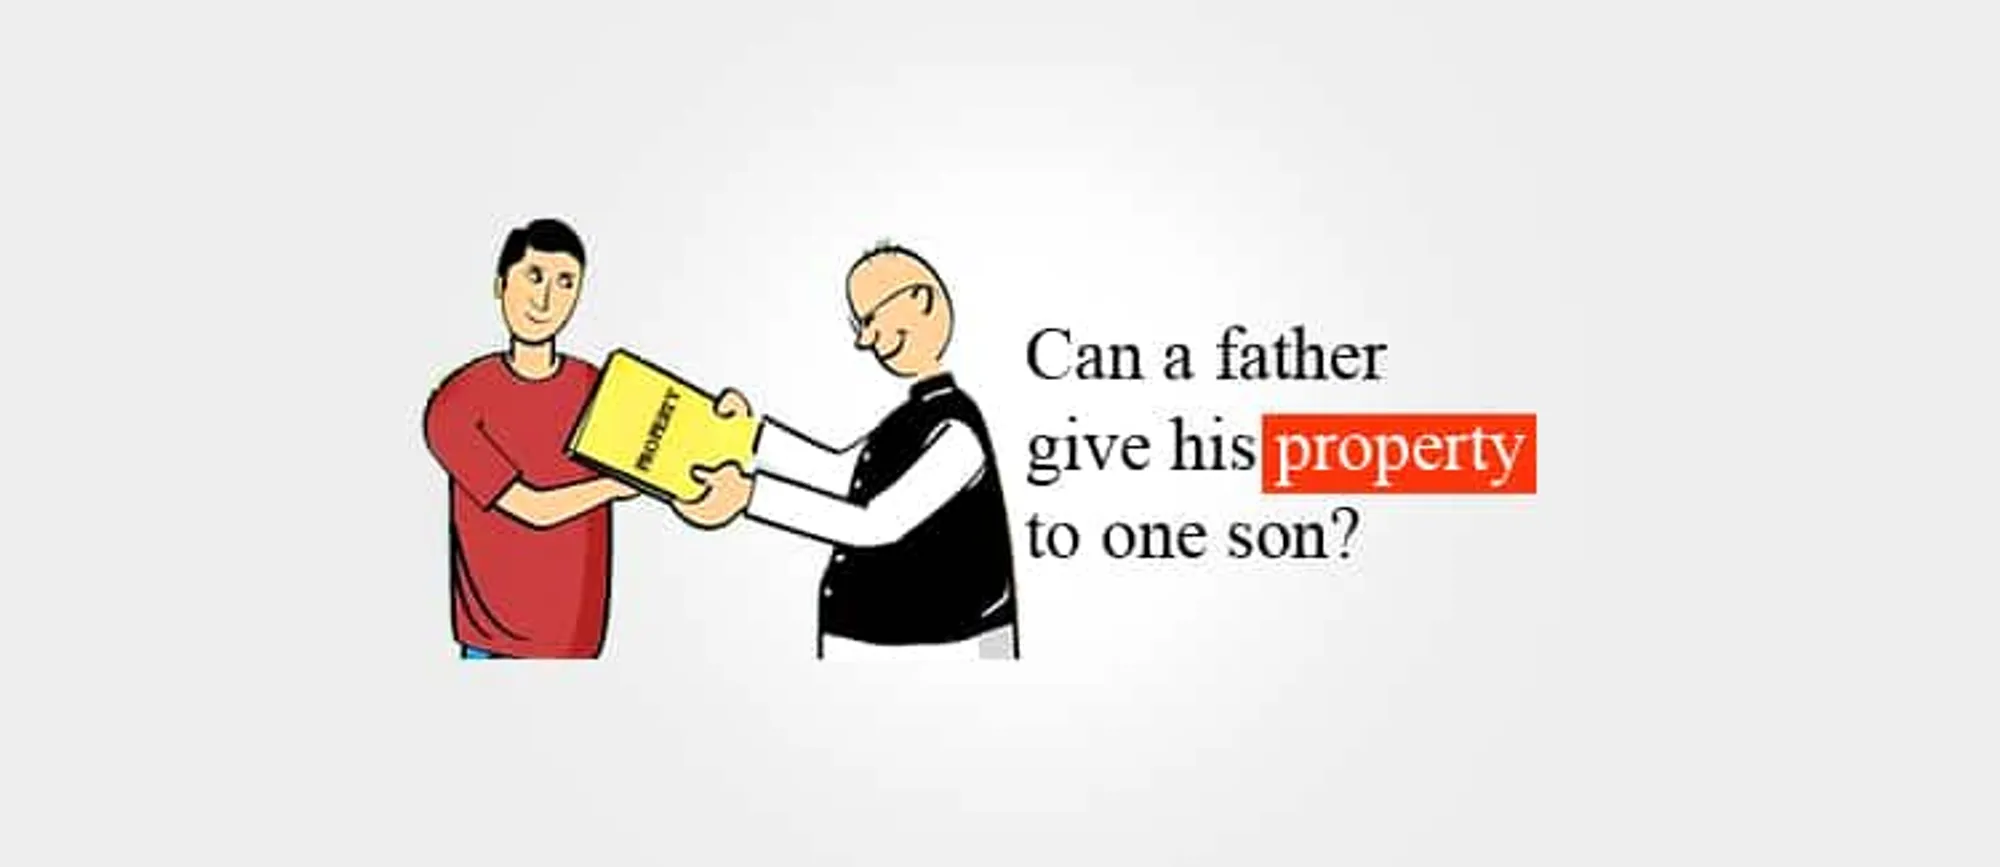 Can a father give his property to one son?